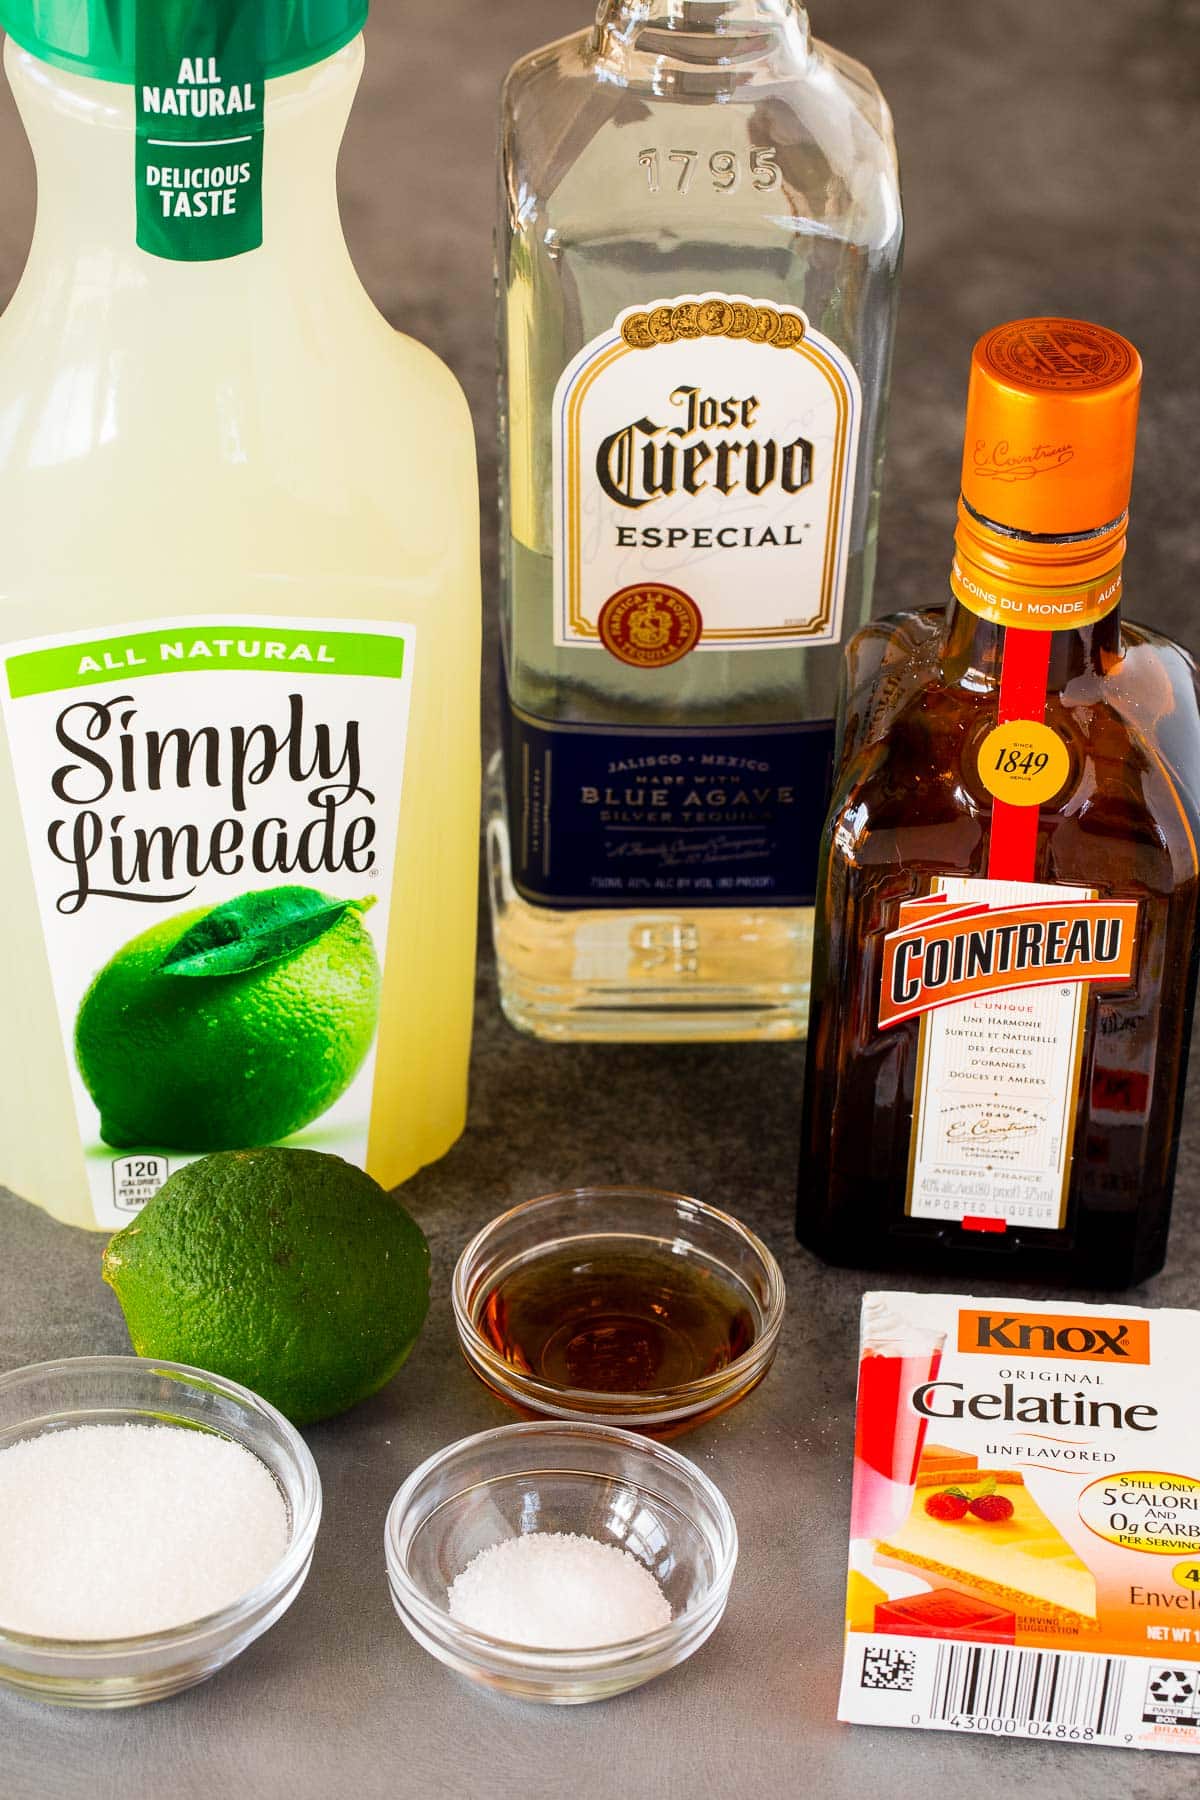 Ingredients including limemade, tequila, triple sec, gelatin and agave syrup.